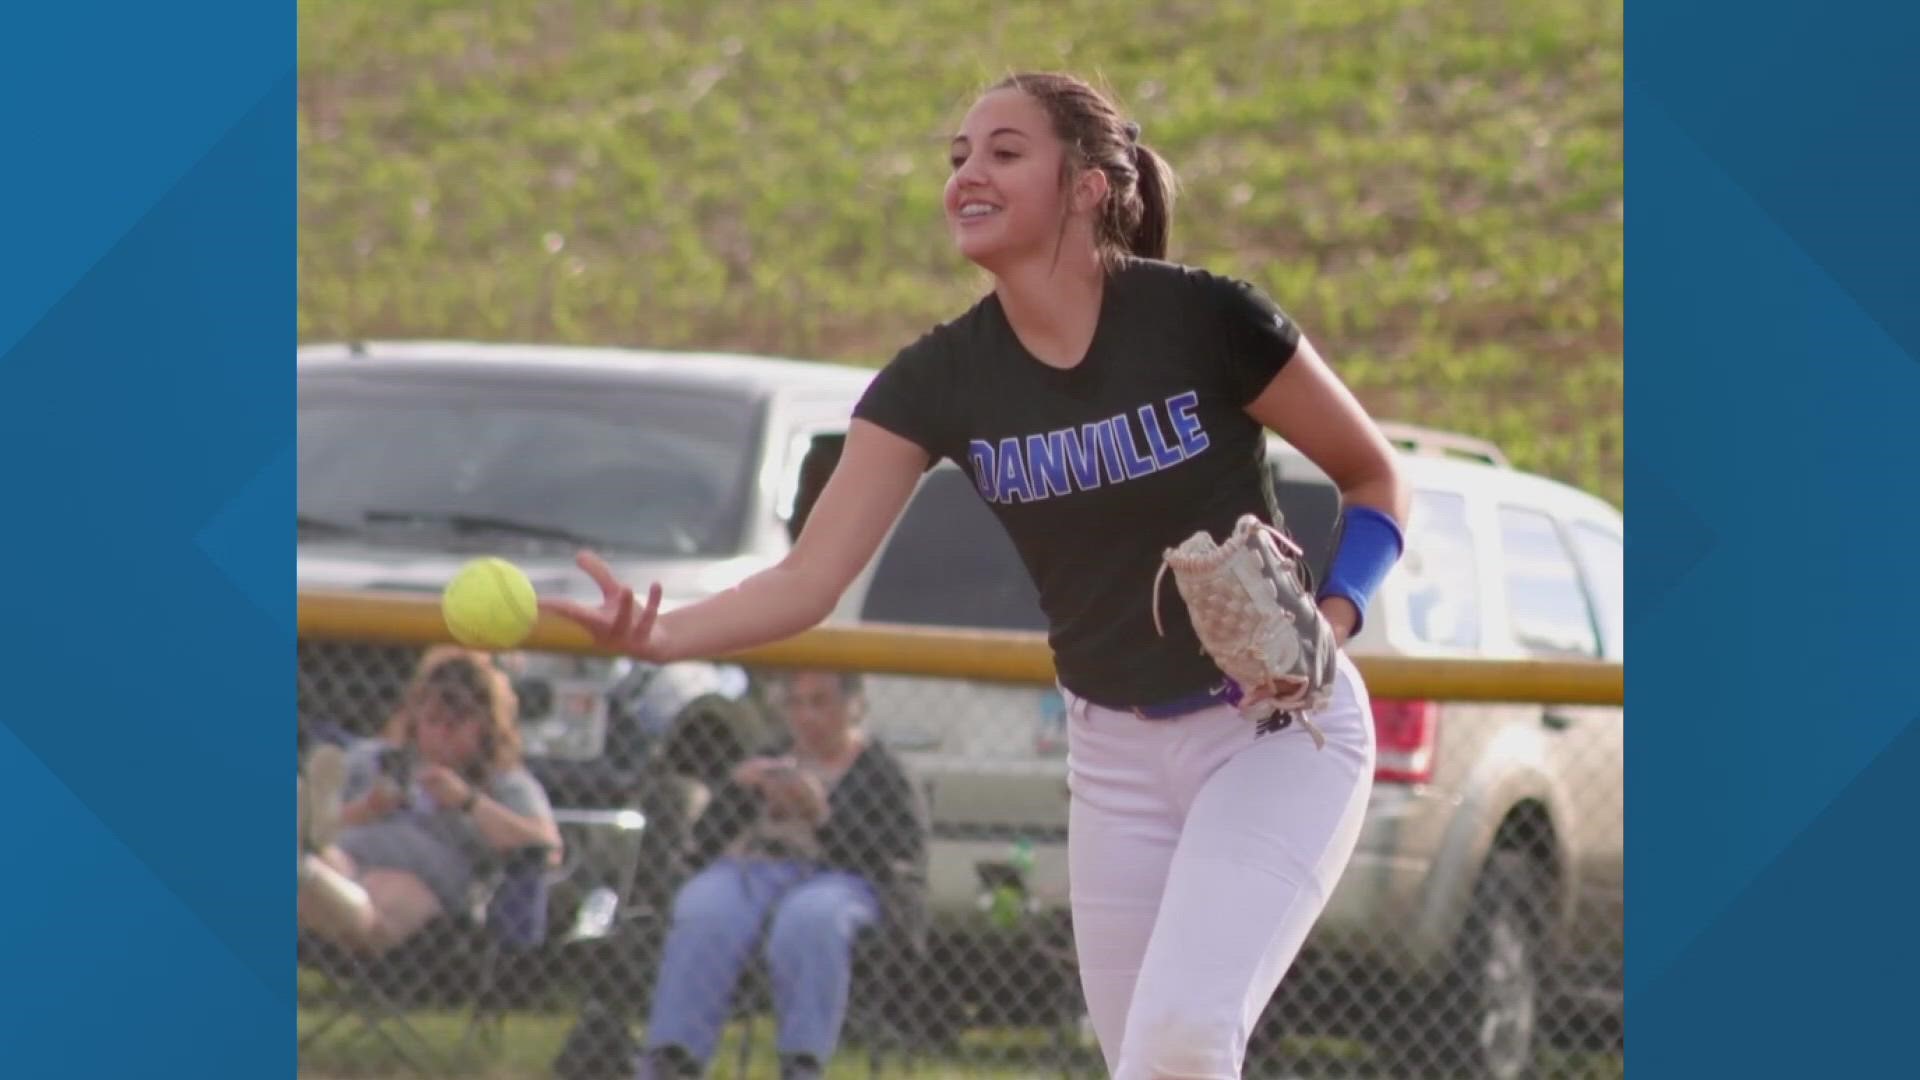 Cordelia Richert plays softball at Danville High School and is the vice president of the National Honor Society.